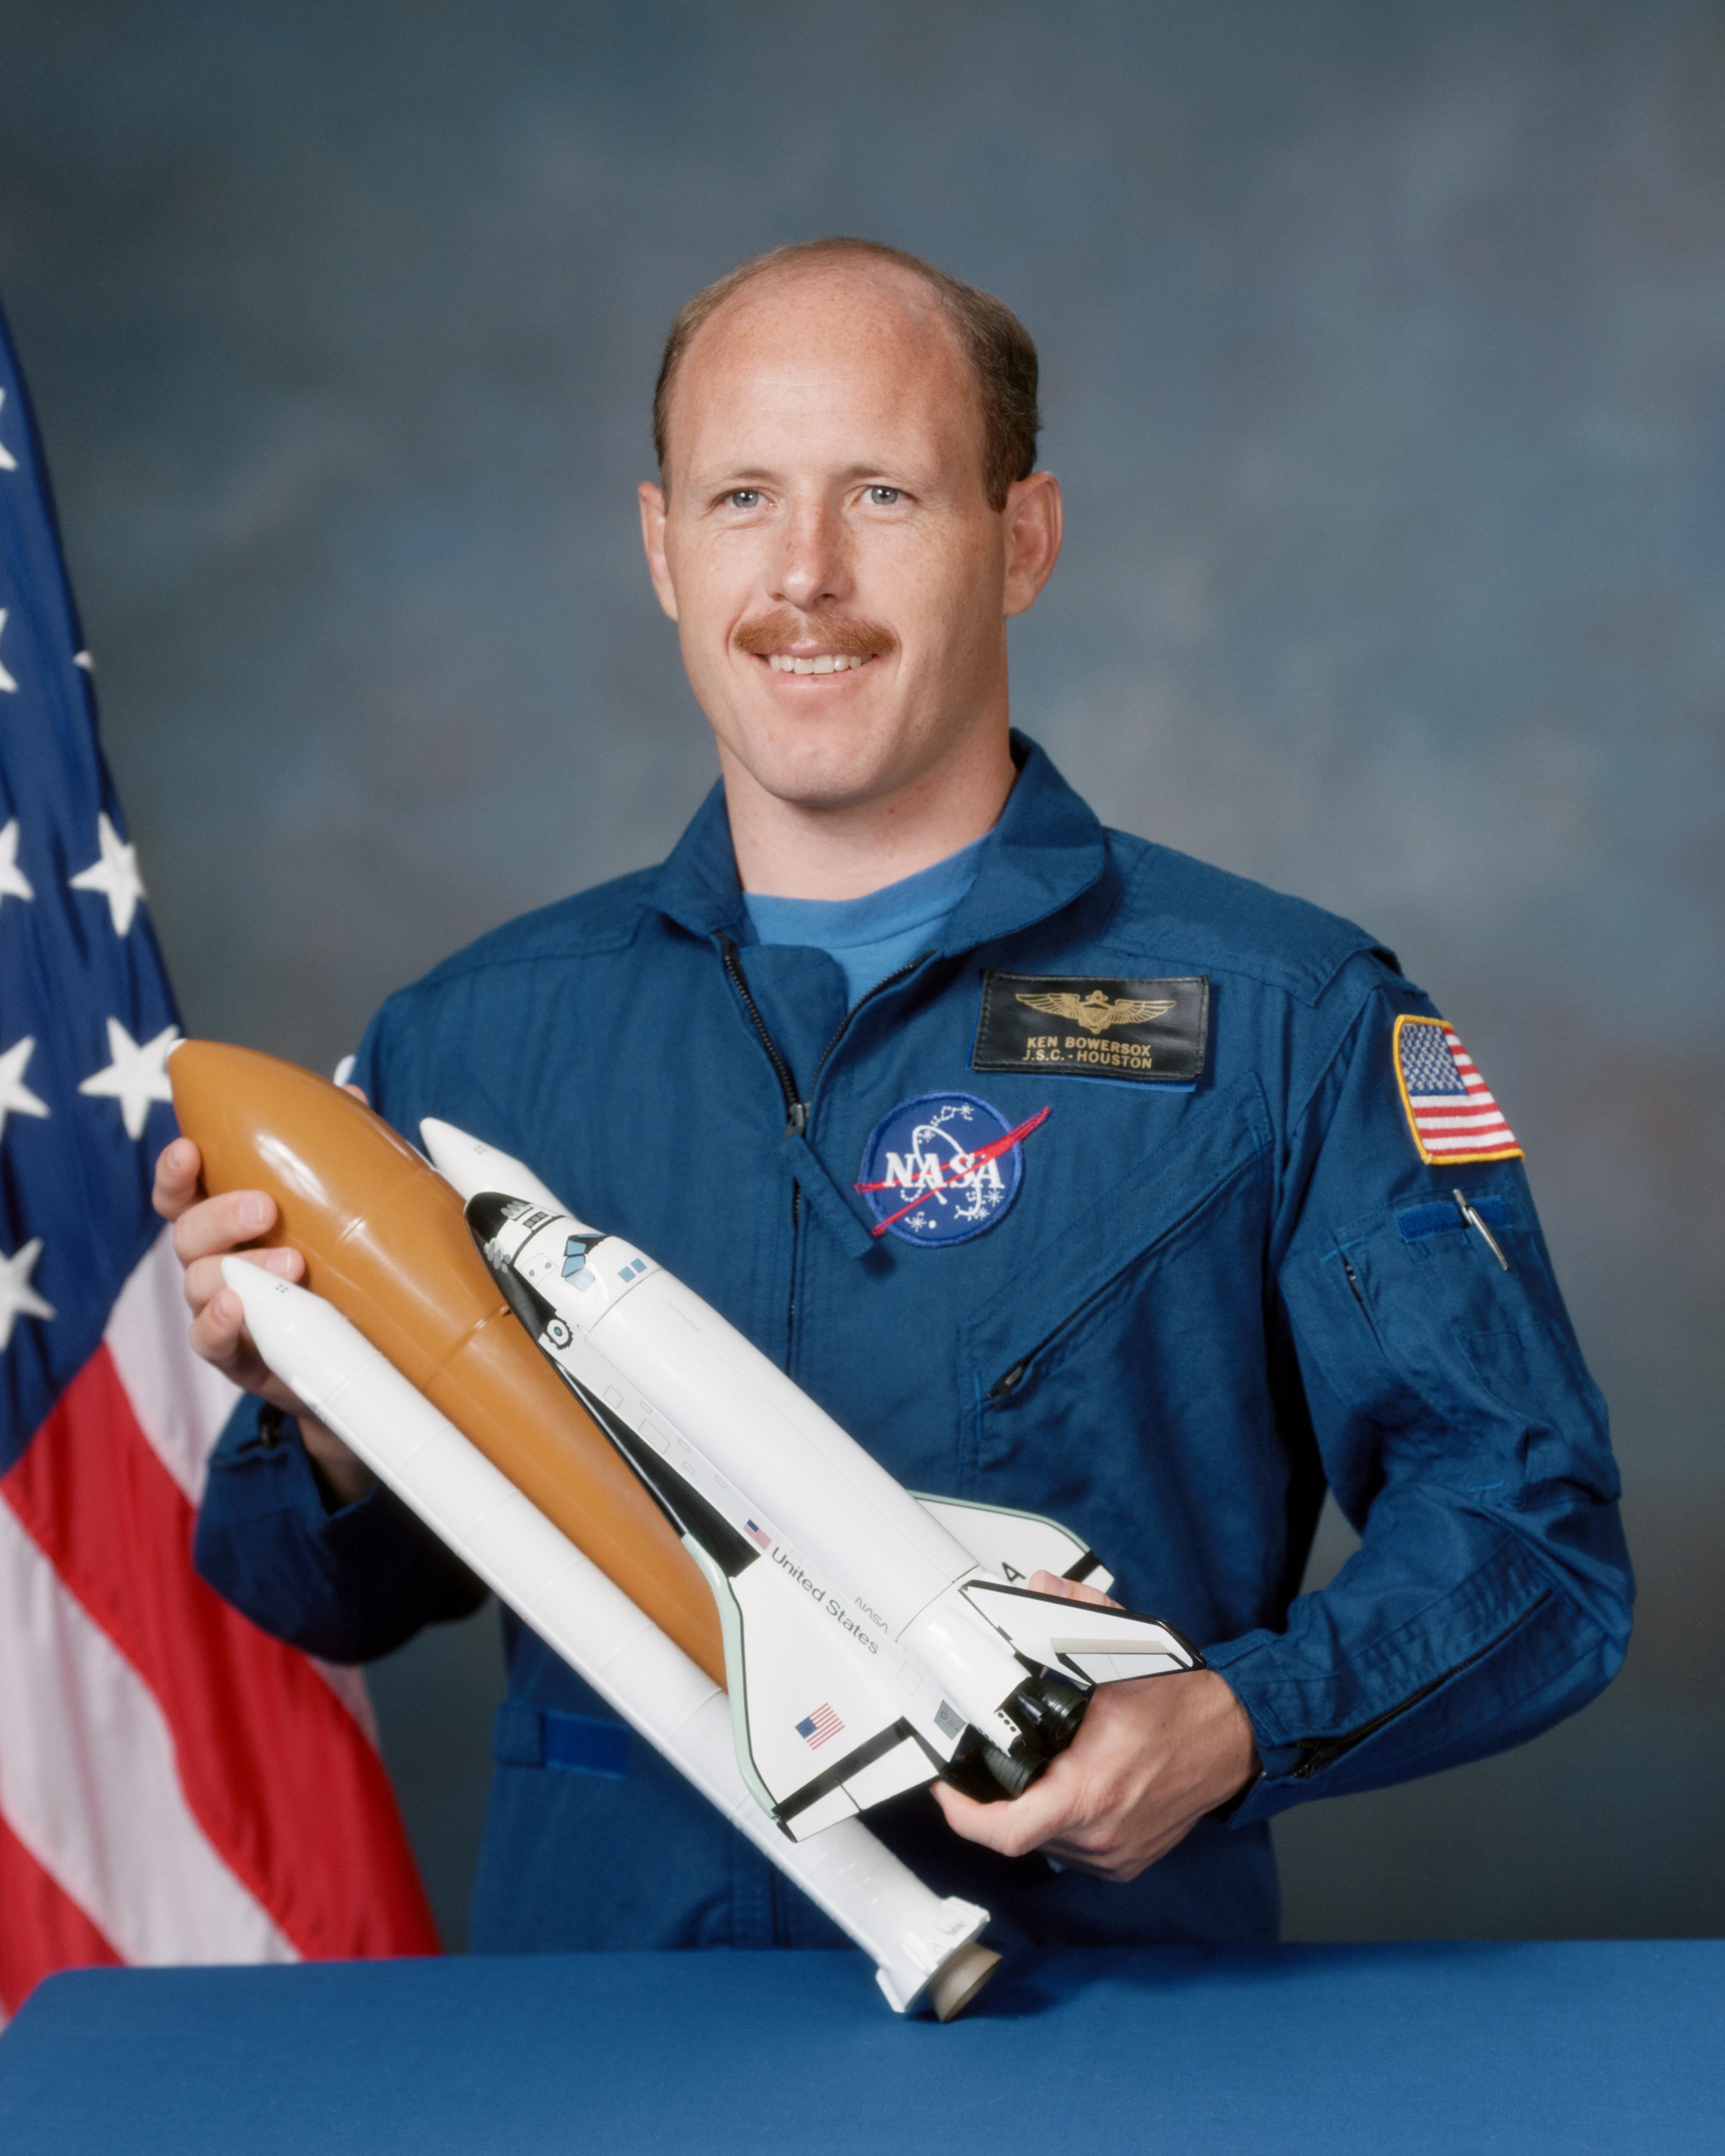 Official astronaut portrait of Kenneth Bowersox.